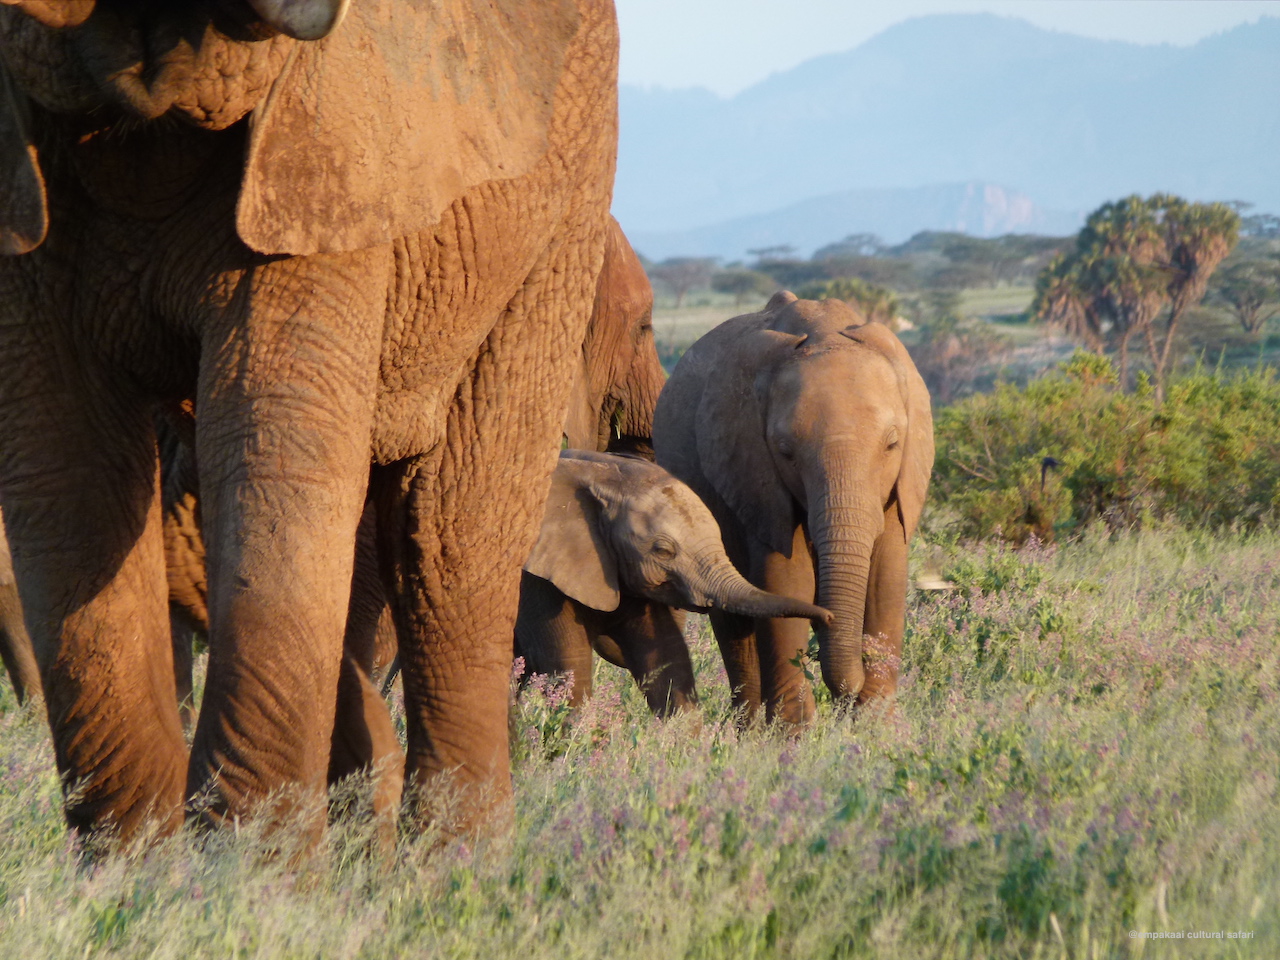 We met this beautiful family of elephants during the evening drive, and then again during the morning drive in Samburu National Reserve